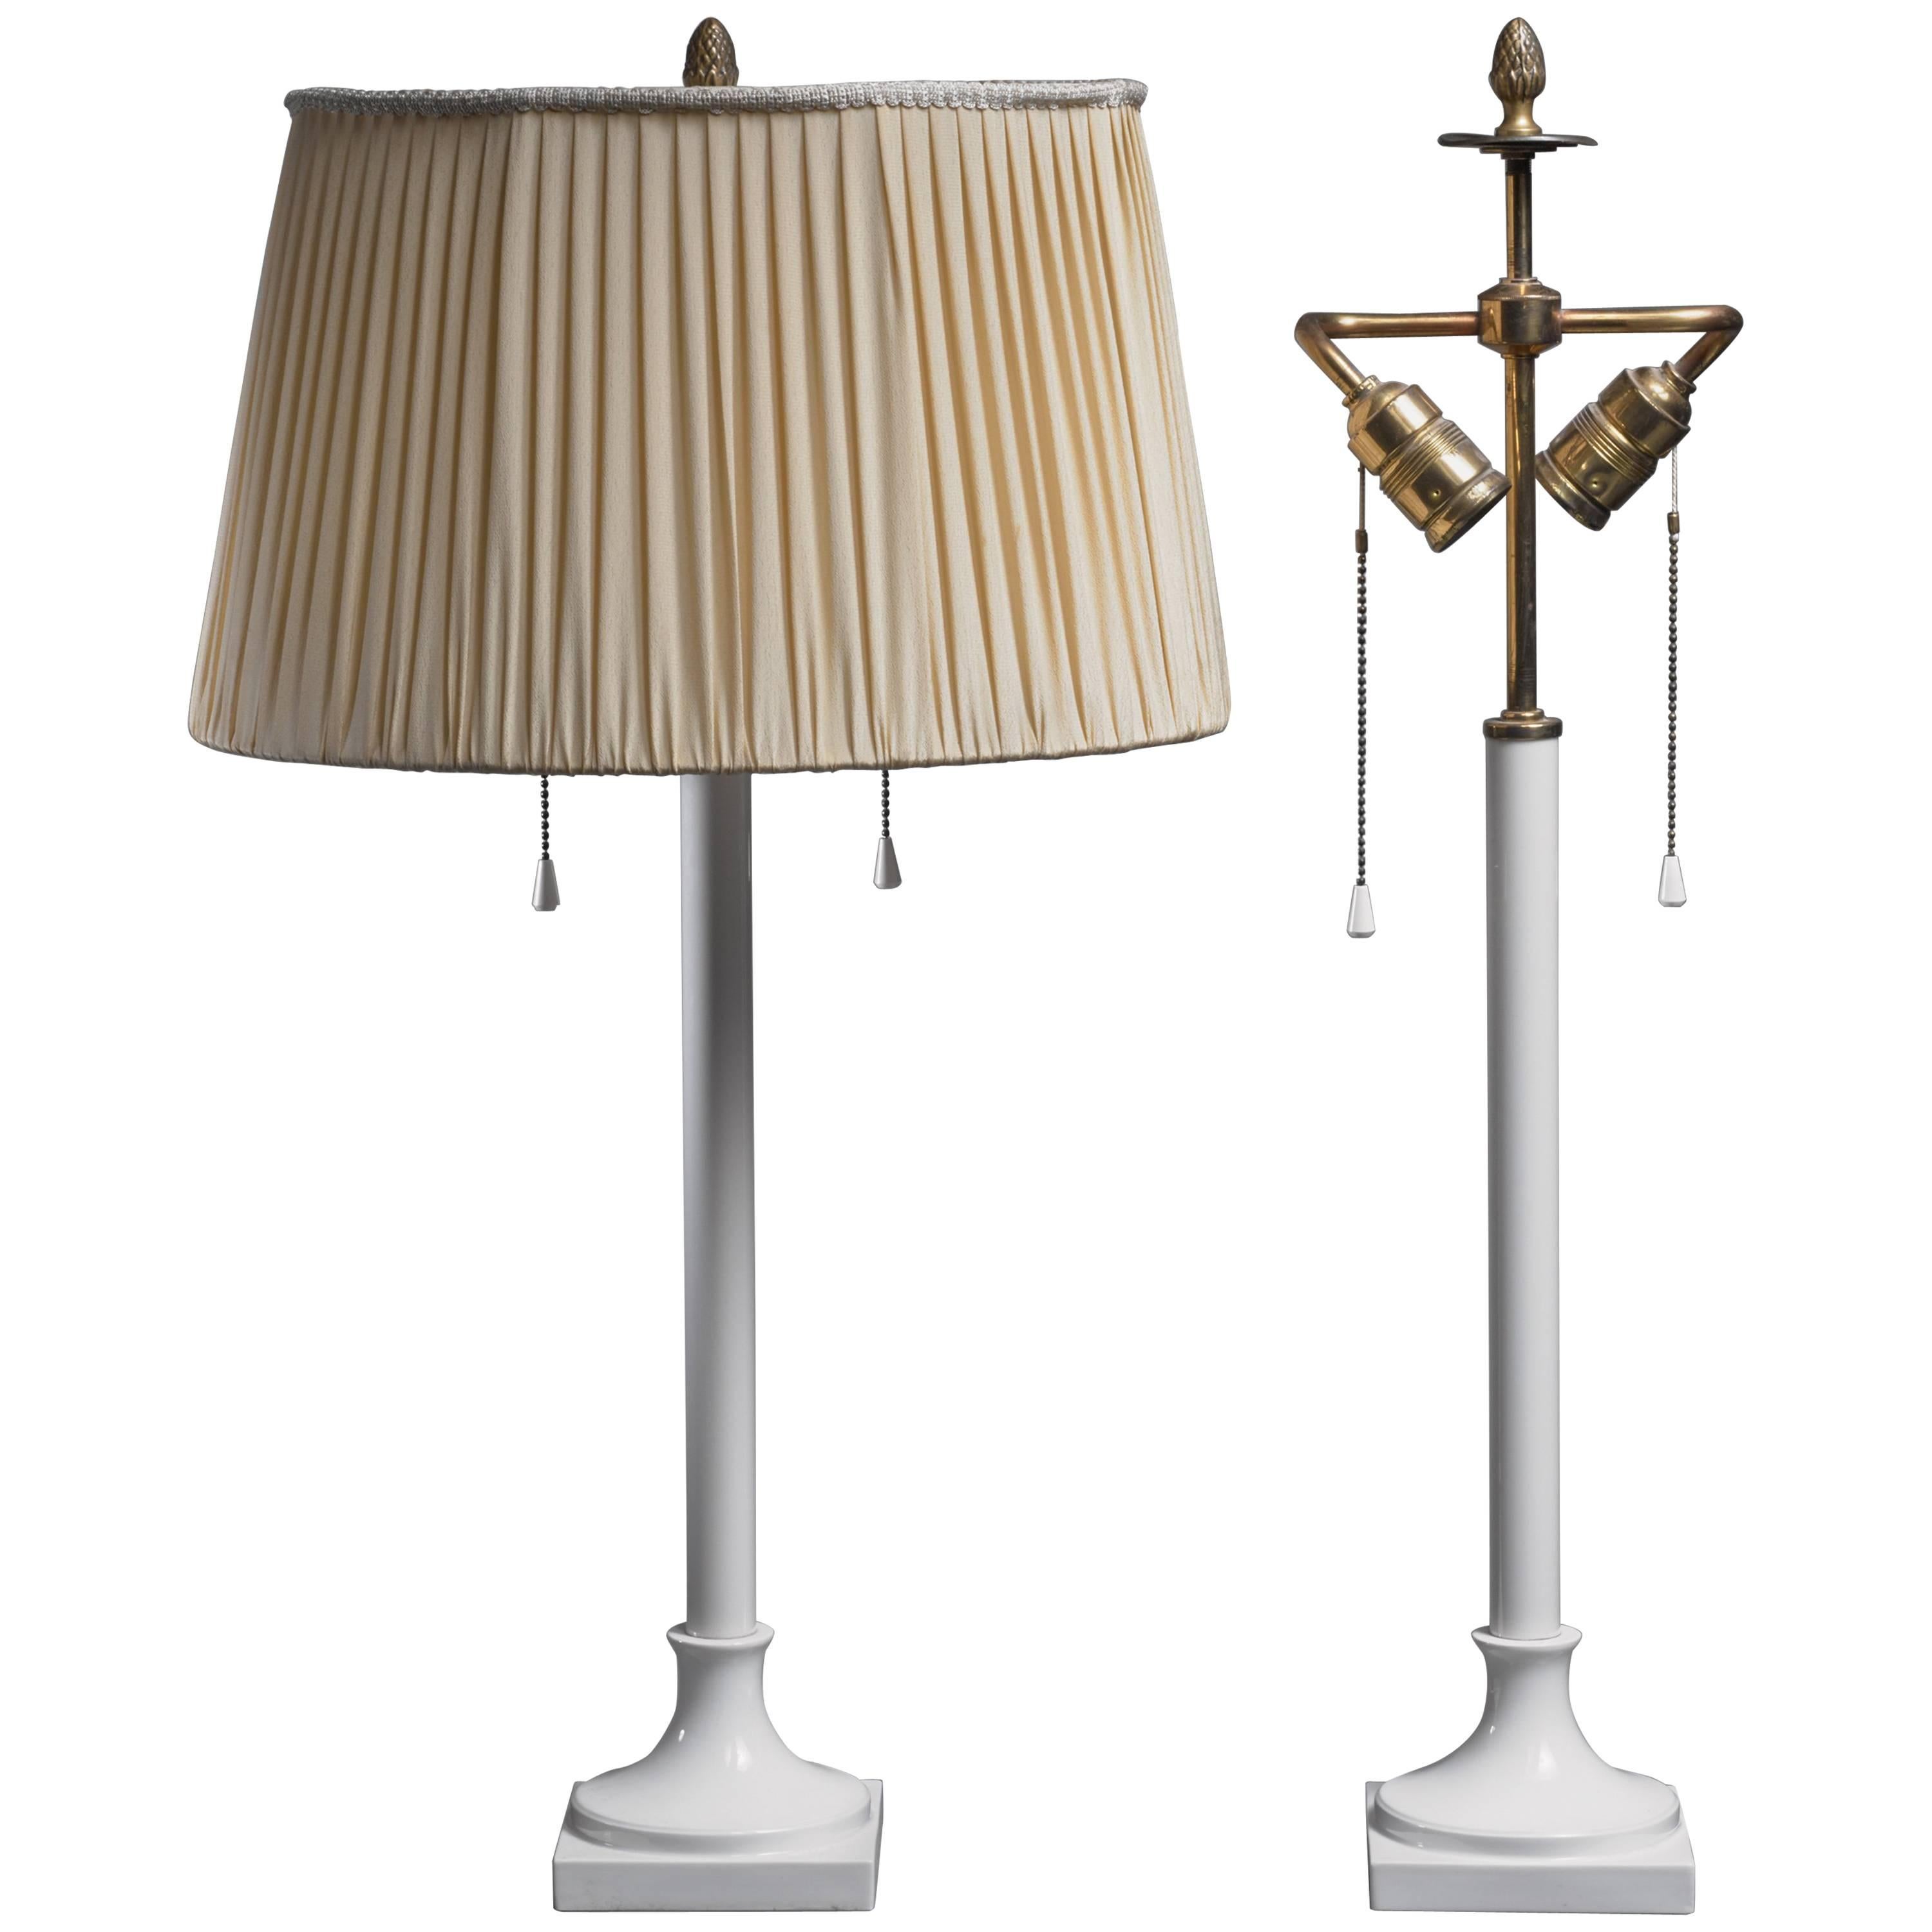 Pair of White Porcelain Table Lamps by KPM, Berlin, 1930s For Sale